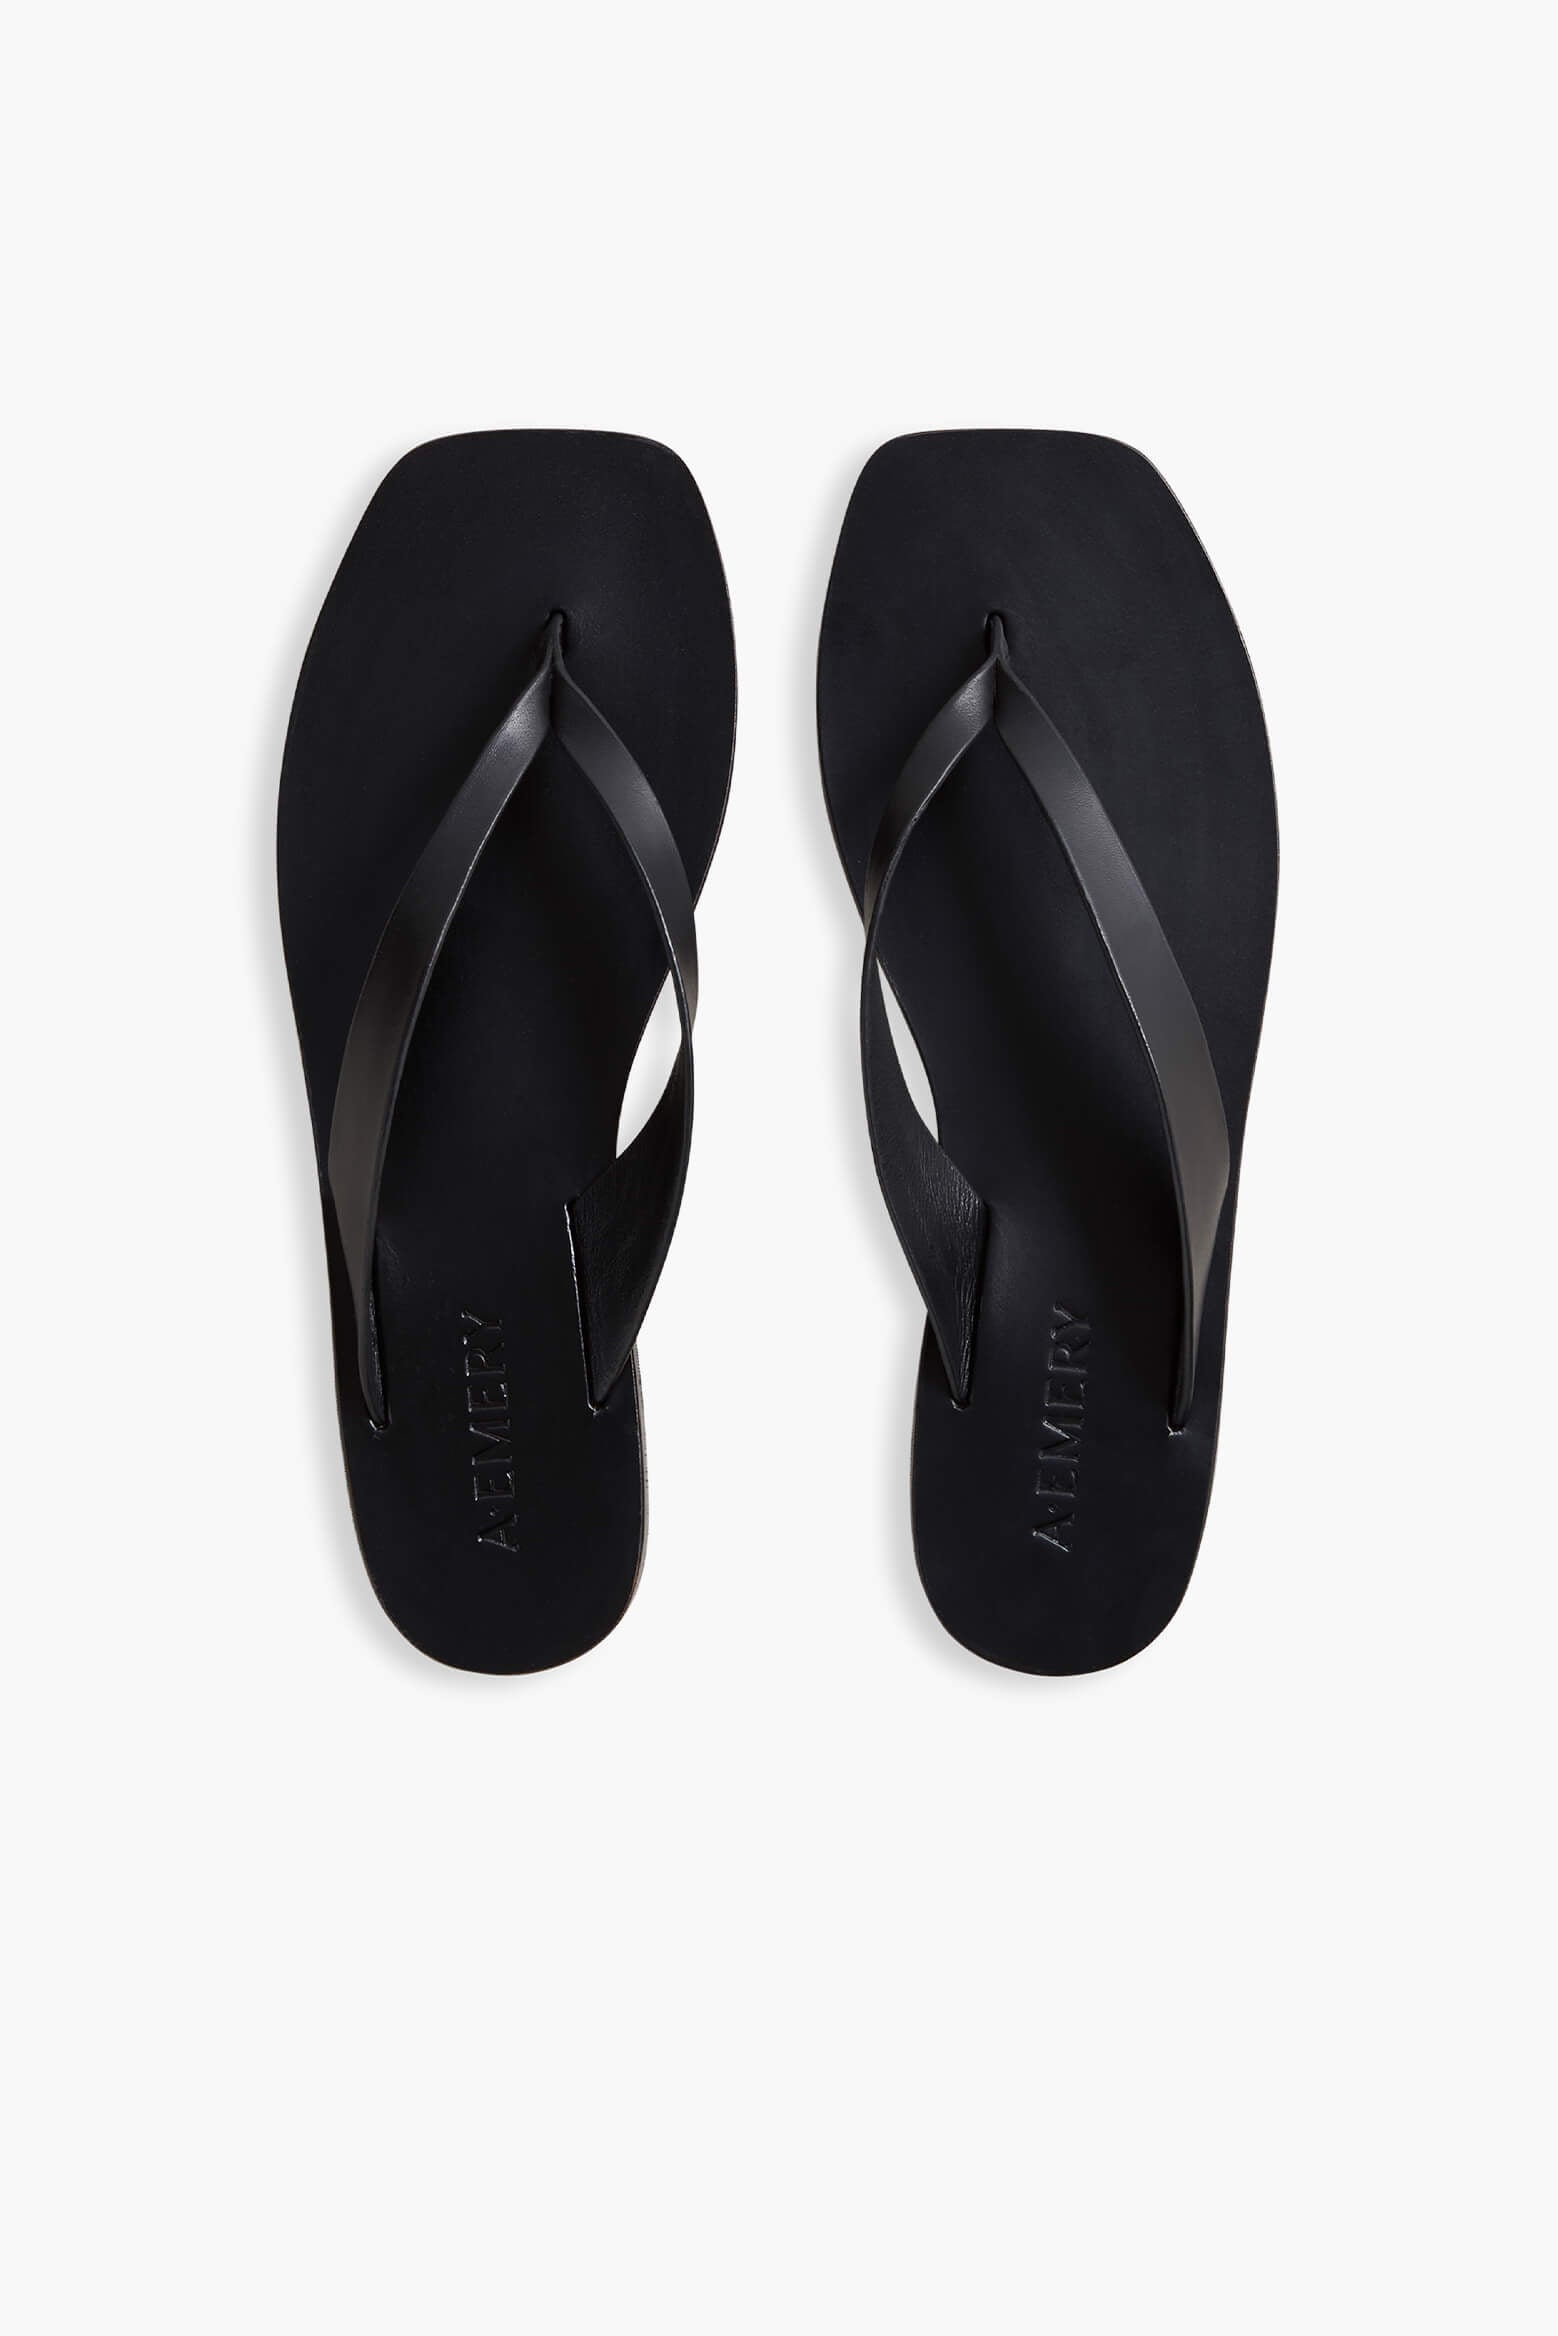 A.Emery Kinto Sandal in Black available at The New Trend Australia.